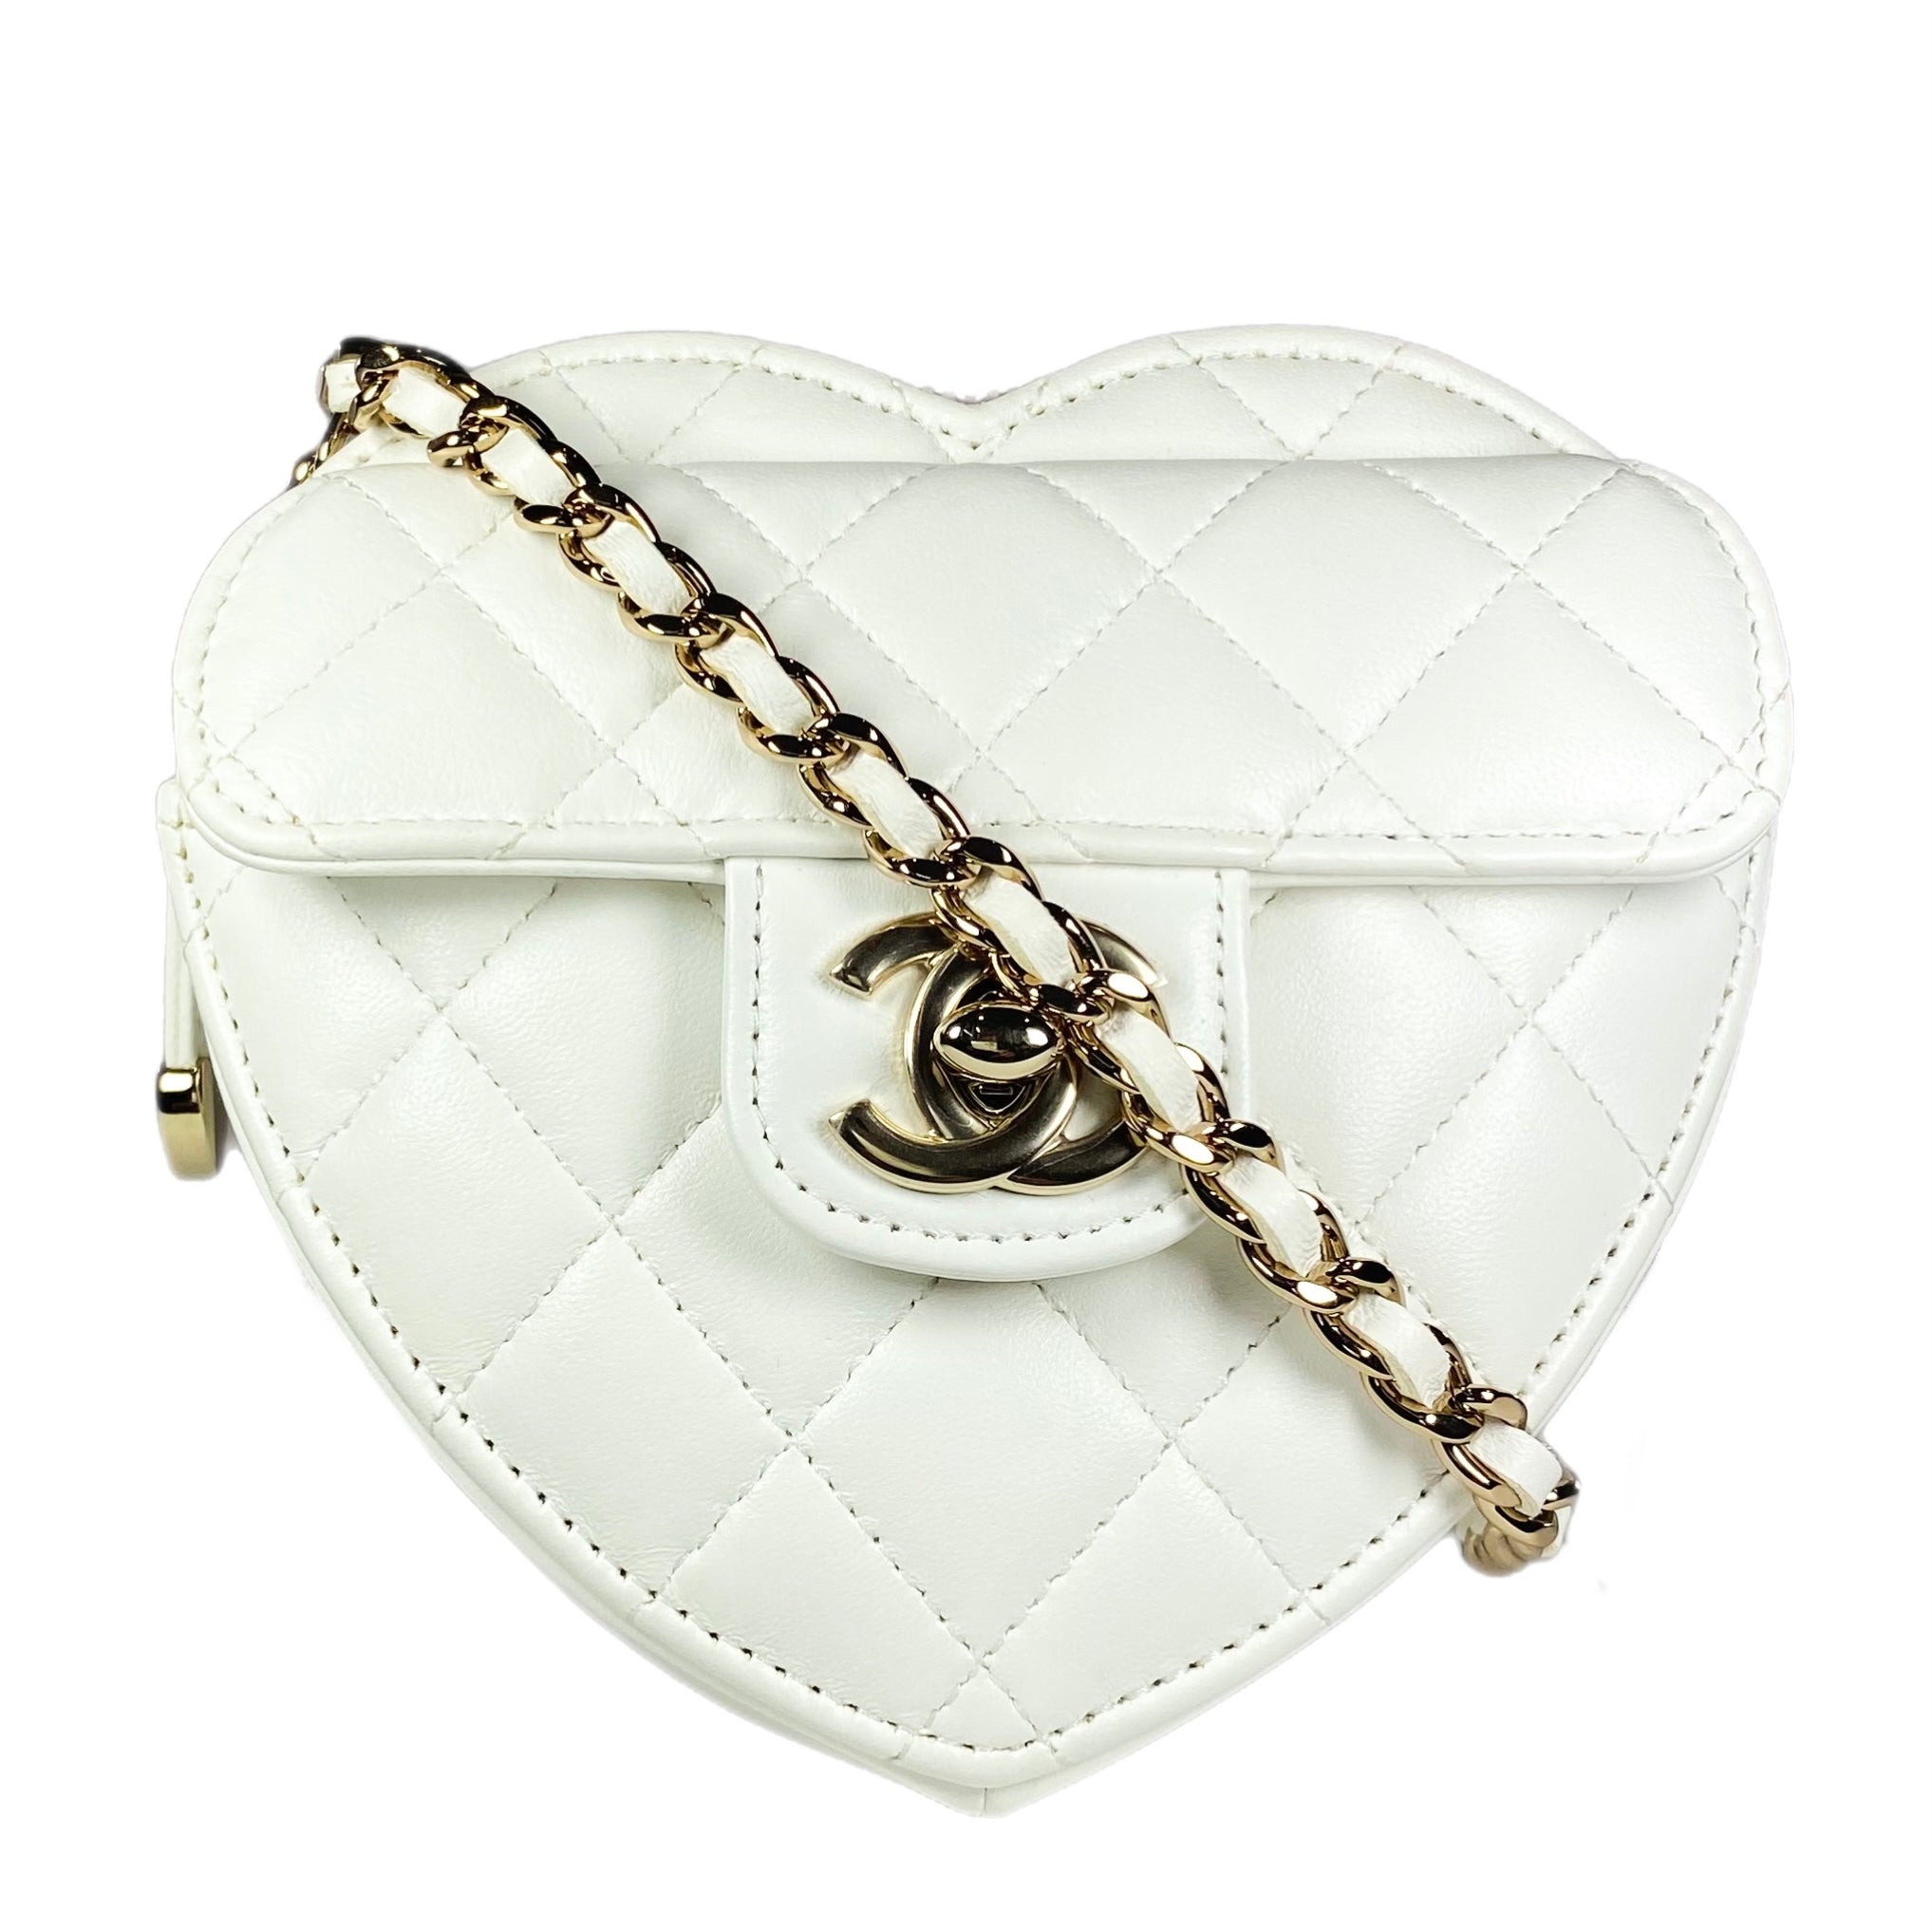 Chanel CC in Love Heart Clutch with Chain